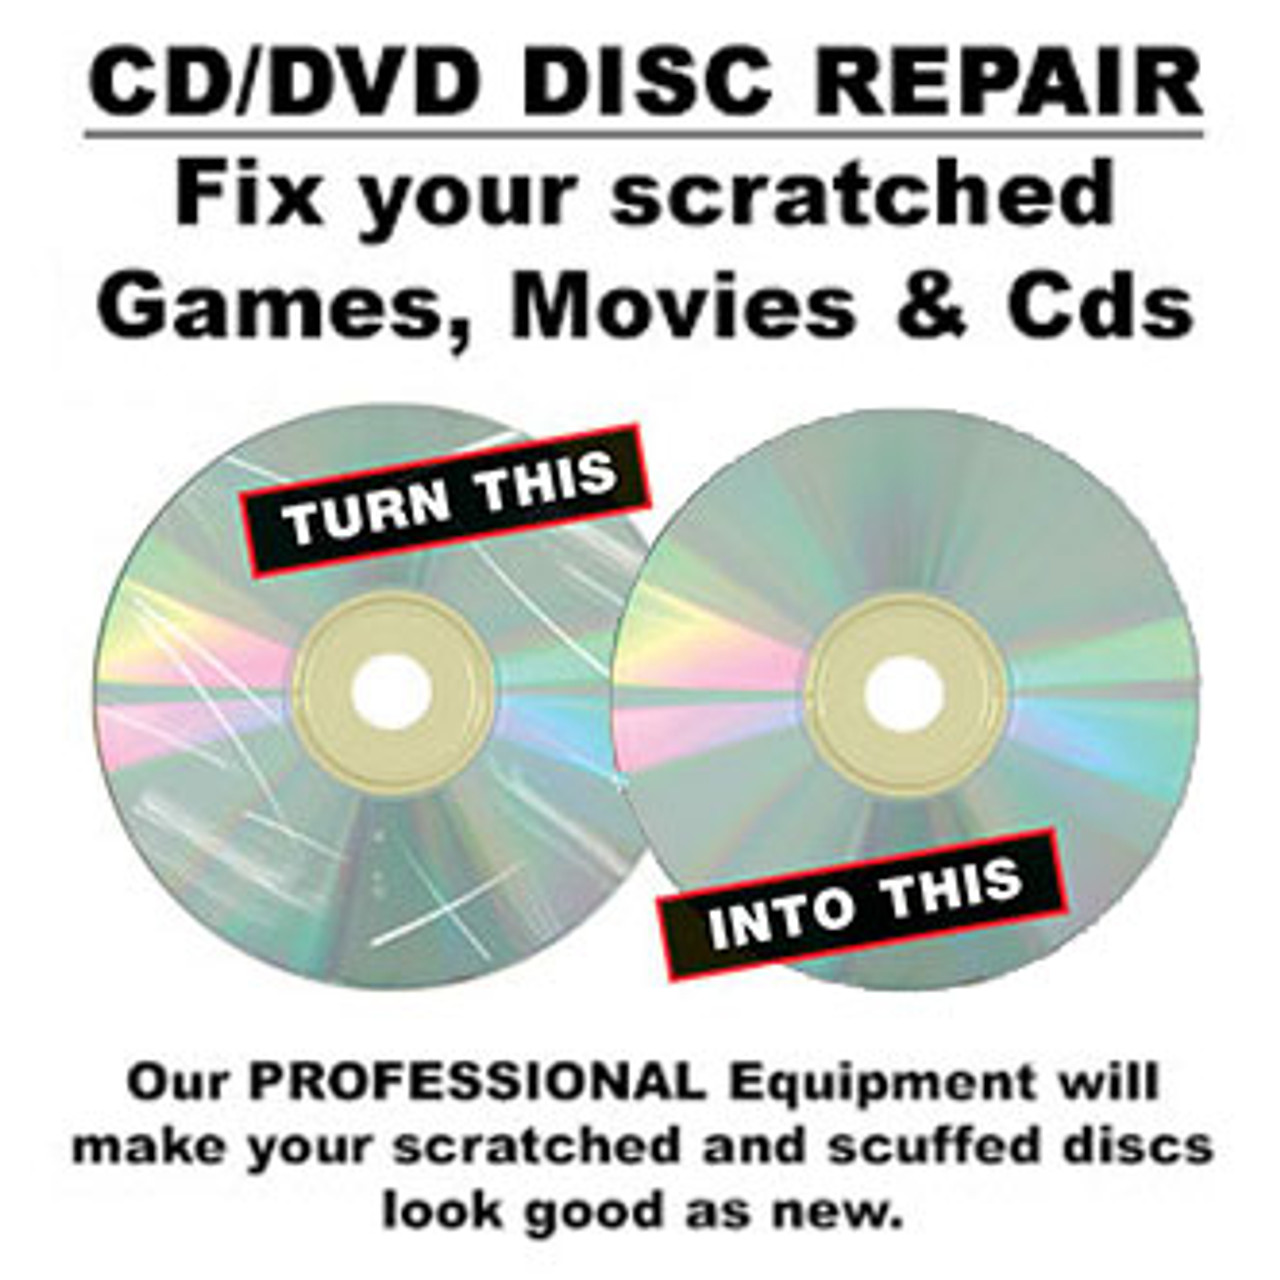 Cd & DVD Repair Service available at VideoGamesNewYork, VGNY